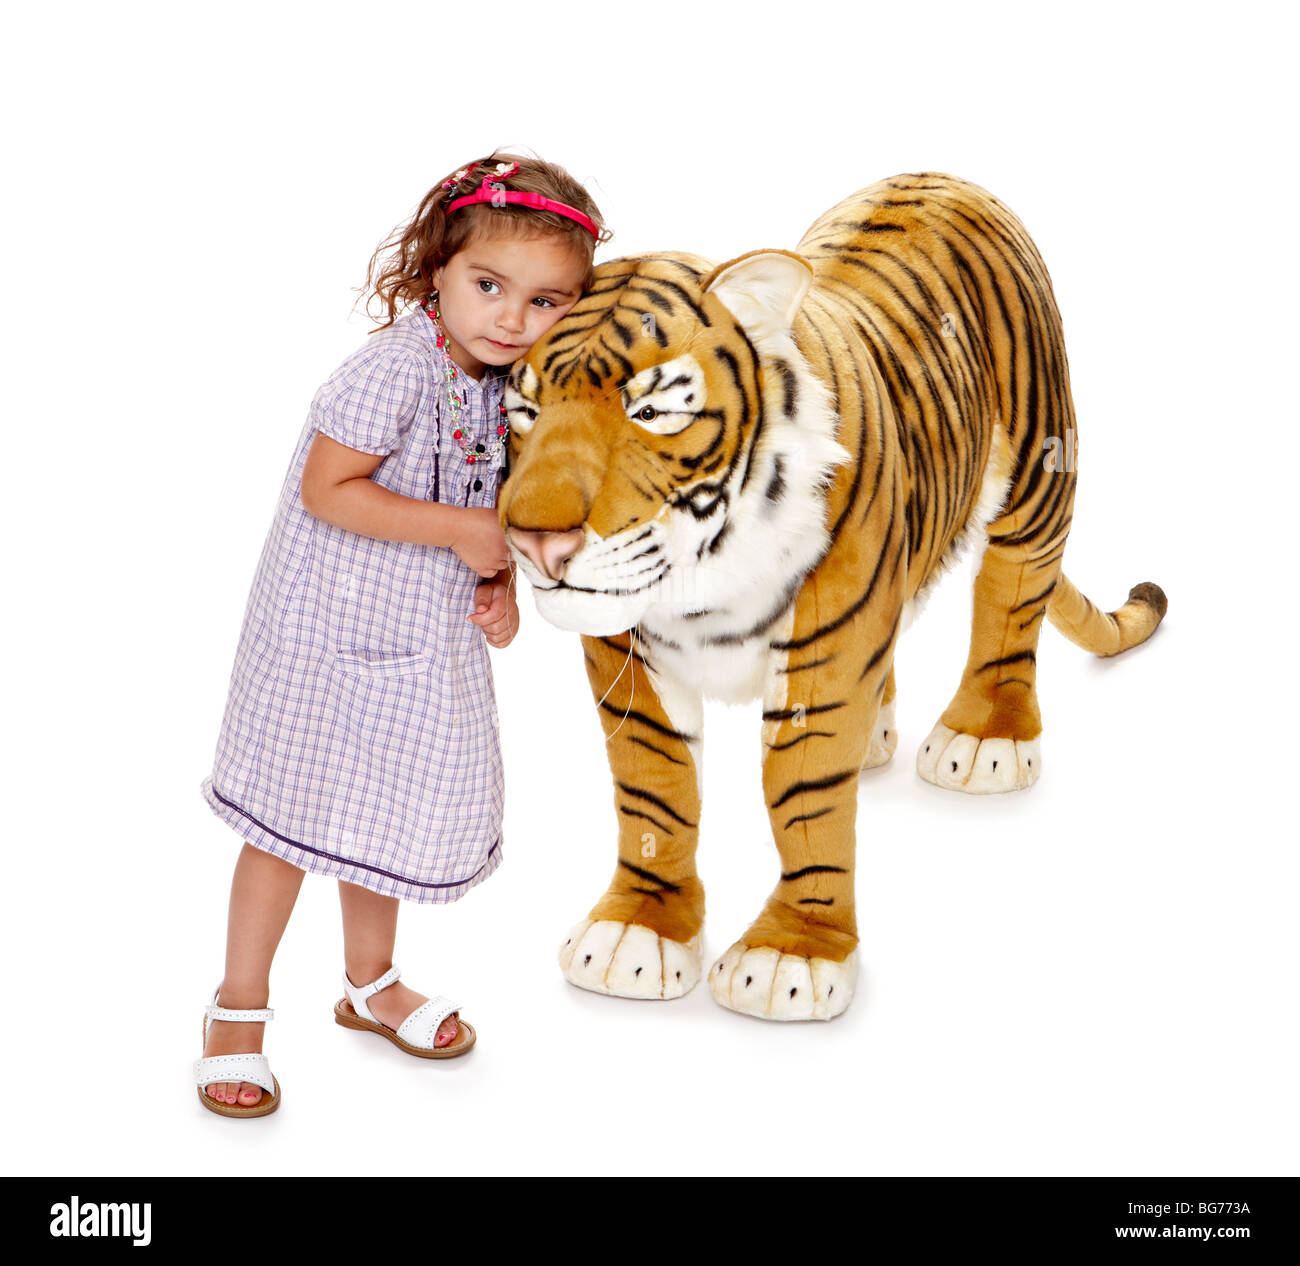 Large Toy Tiger Hannah cuddle Stock Photo